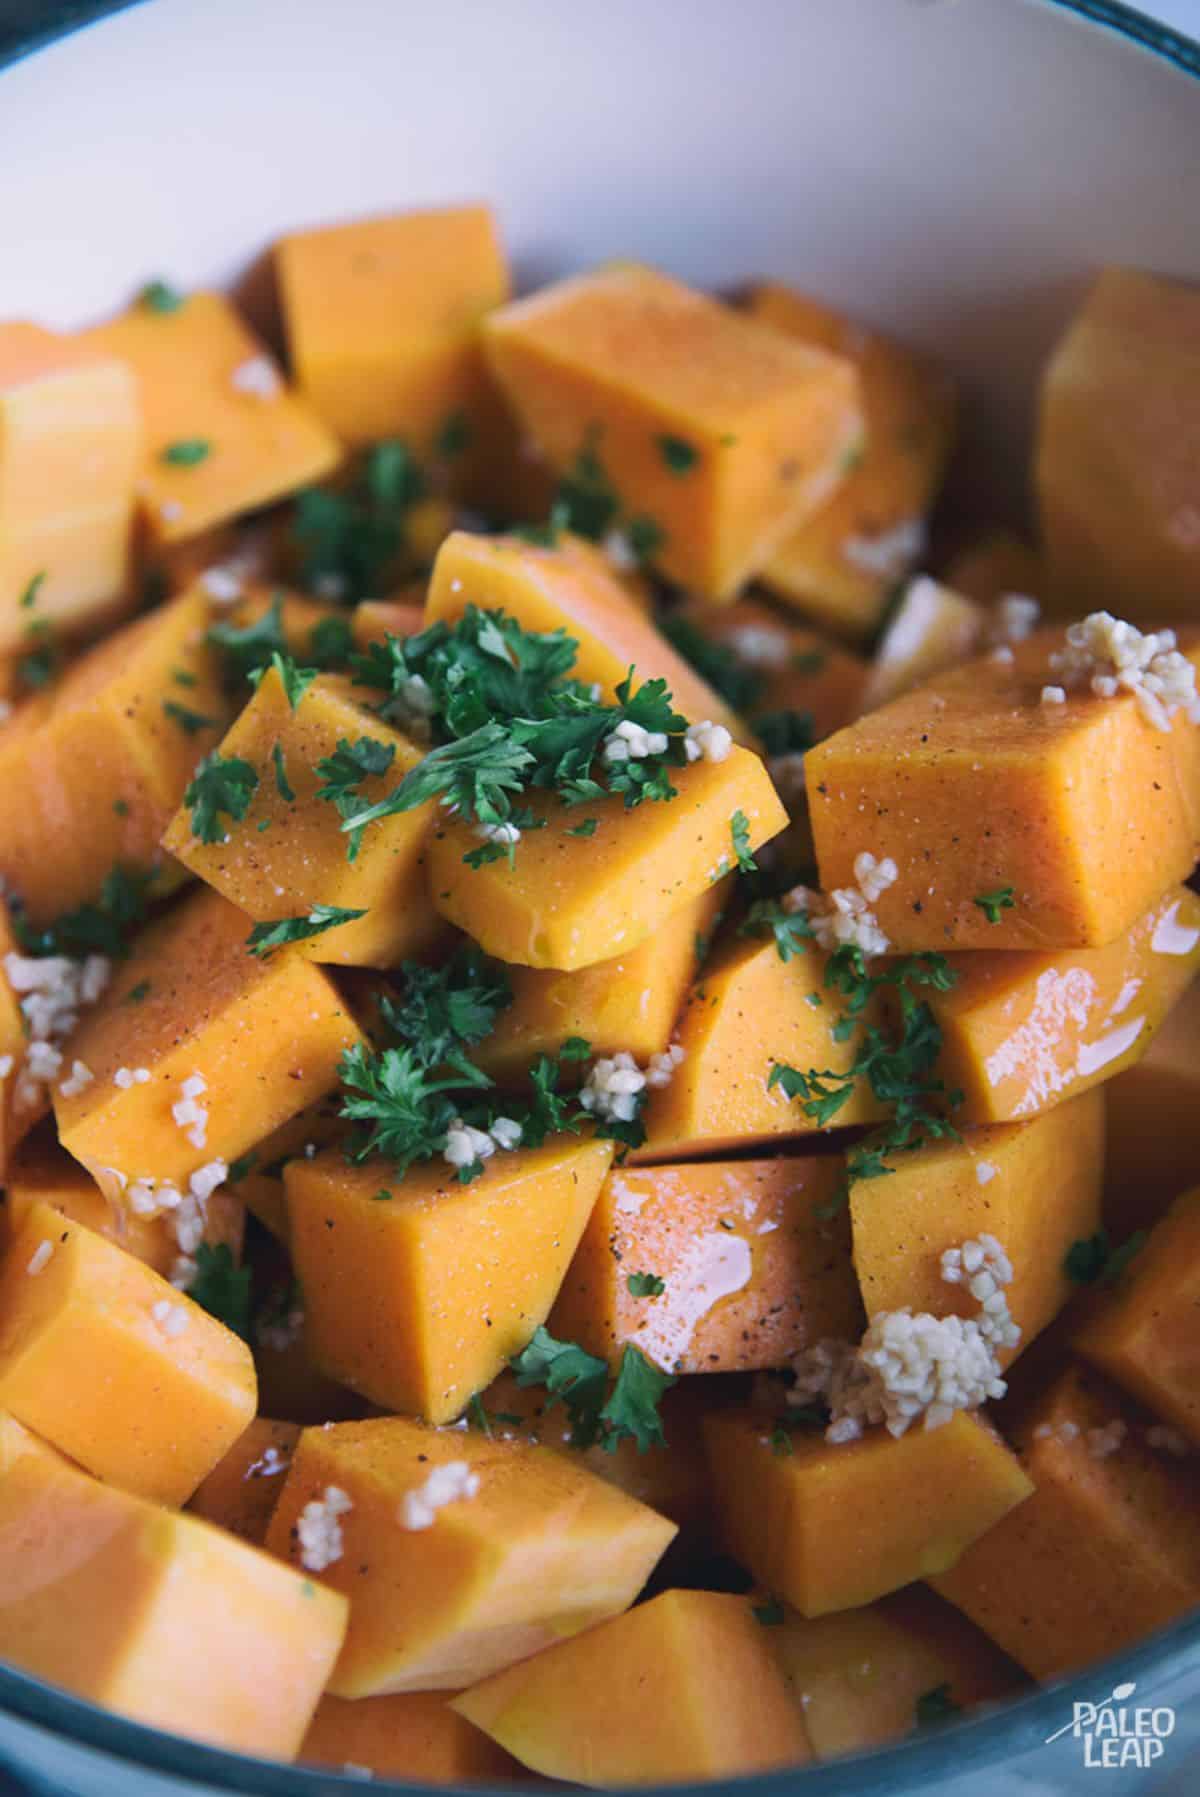 Oven-Roasted Butternut Squash And Kale Recipe Preparation